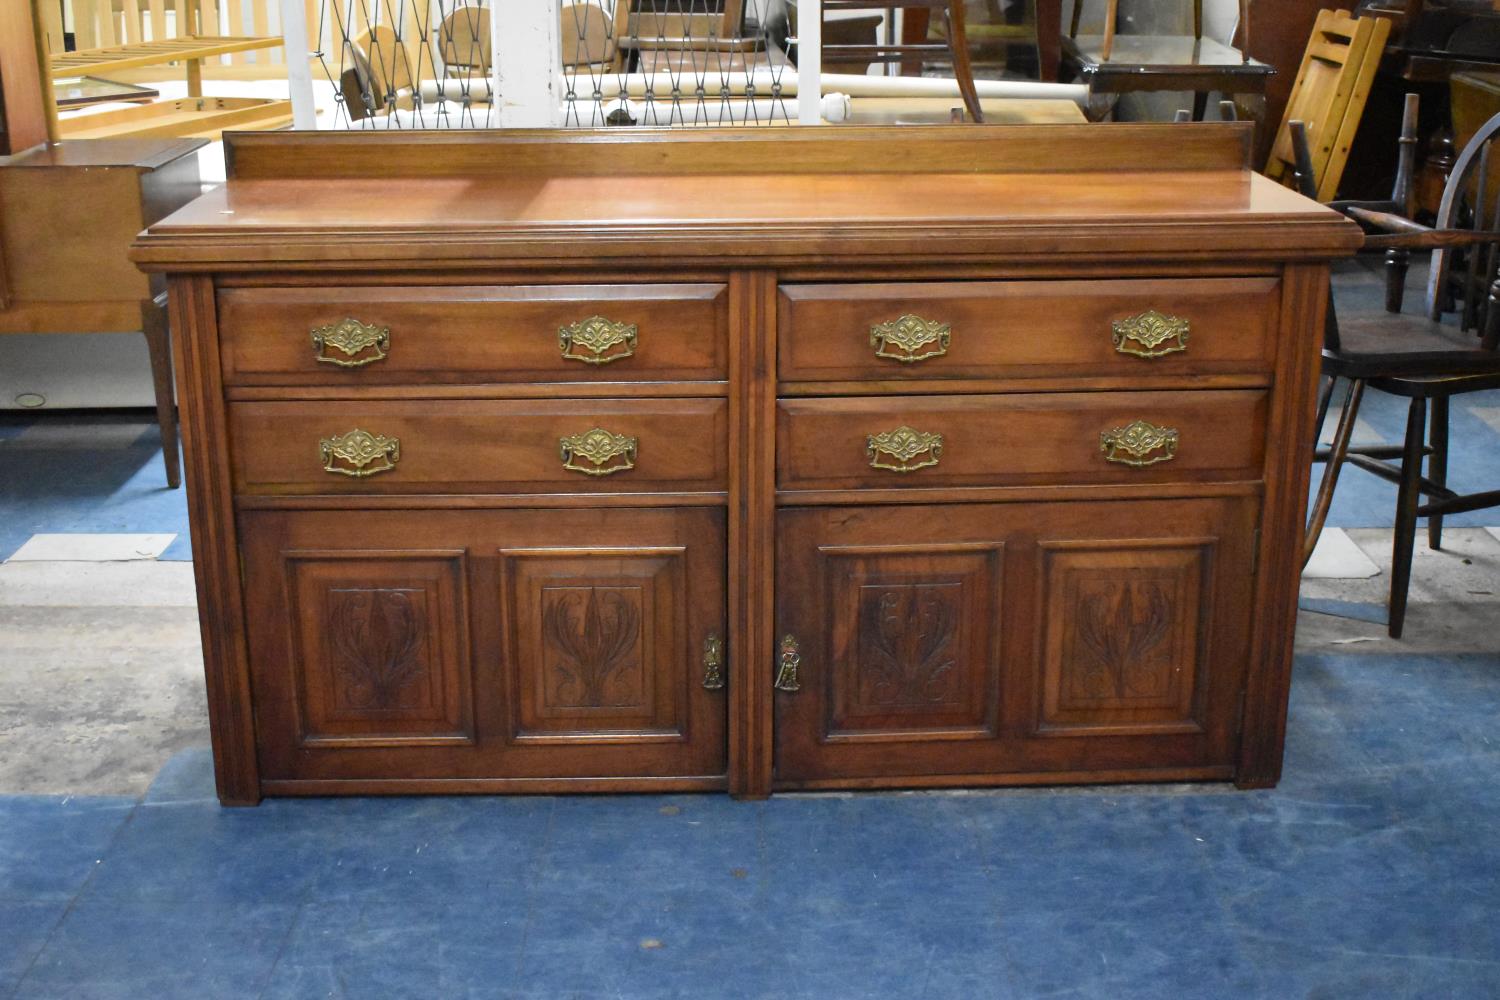 An Edwardian Walnut Galleried Sideboard with Four Long Drawers Over Cupboard Base, 160cm Wide